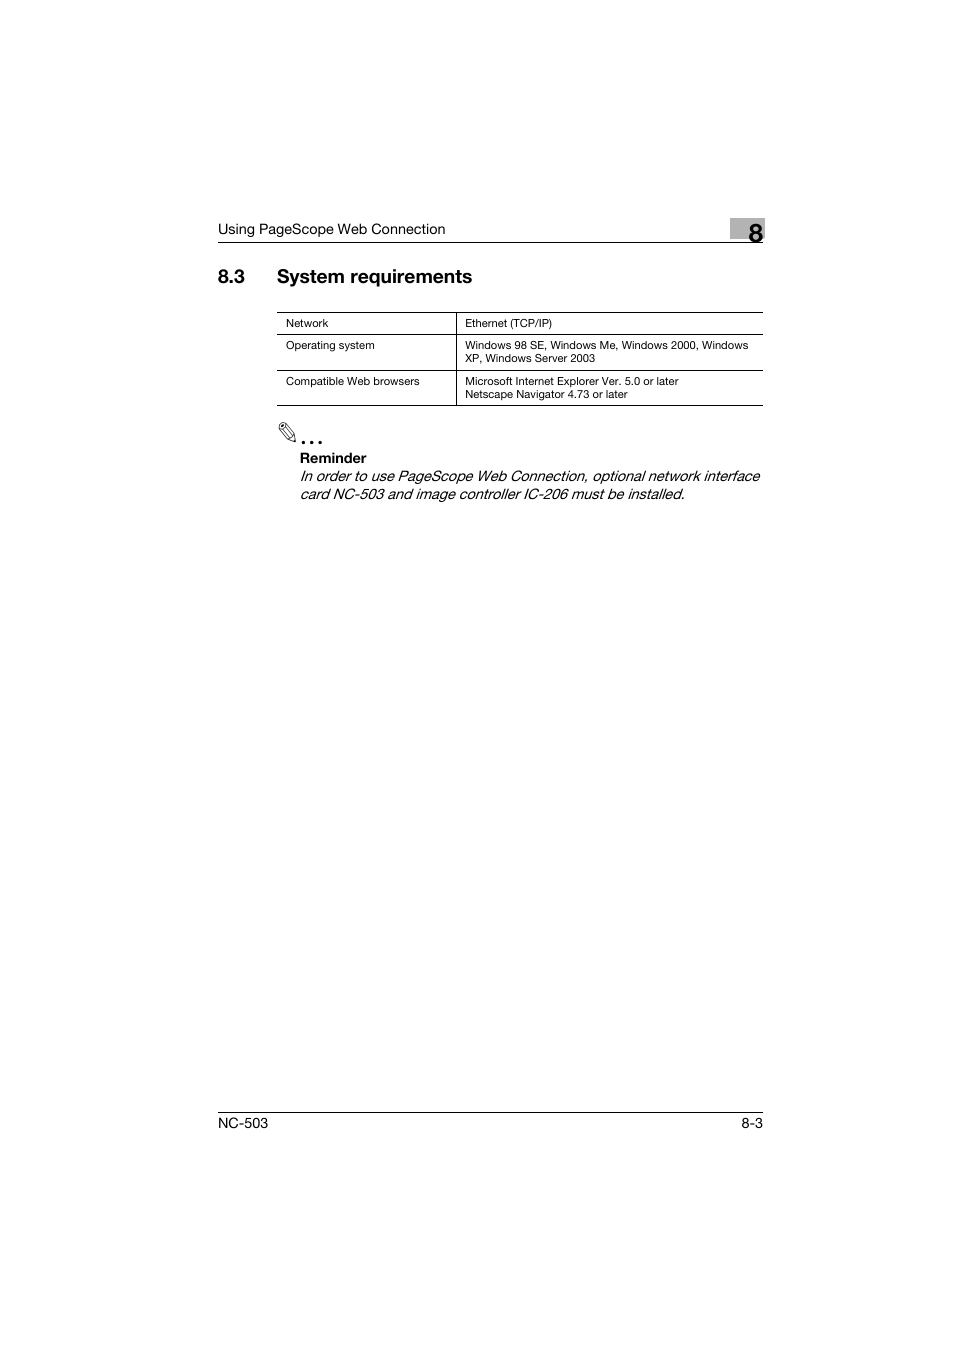 3 system requirements, System requirements -3 | Konica Minolta NC-503 User Manual | Page 168 / 244